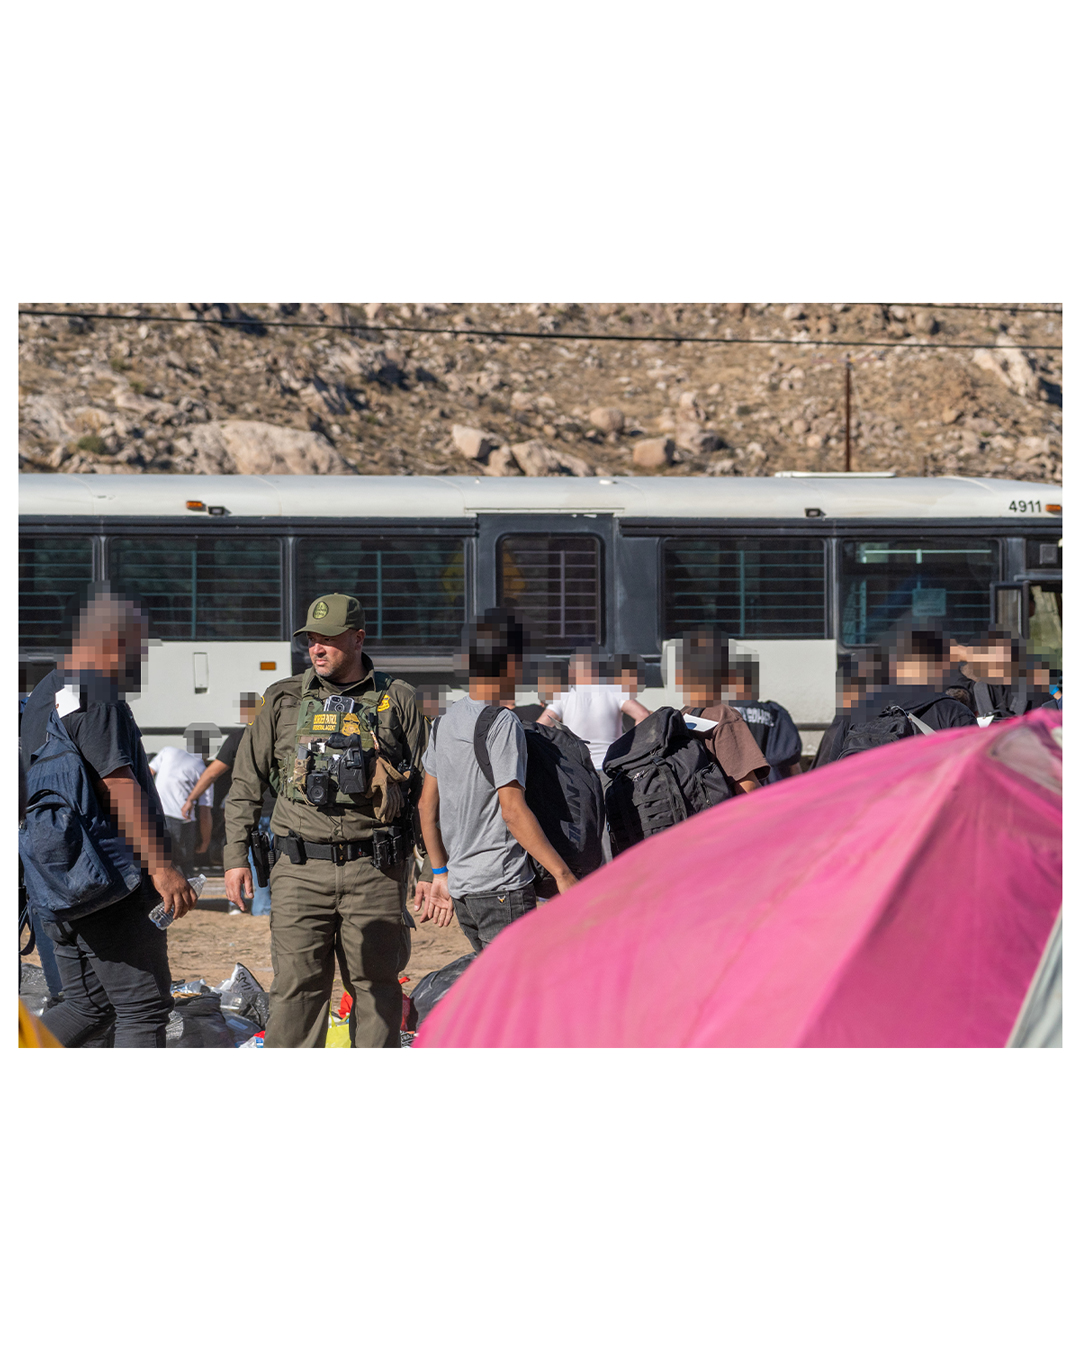 A border patrol agent surveys a group of migrants as they board a bus and load their belongings in the desert; a red tent dominates the lower left foreground. Barren, rocky hills are seen in the background.